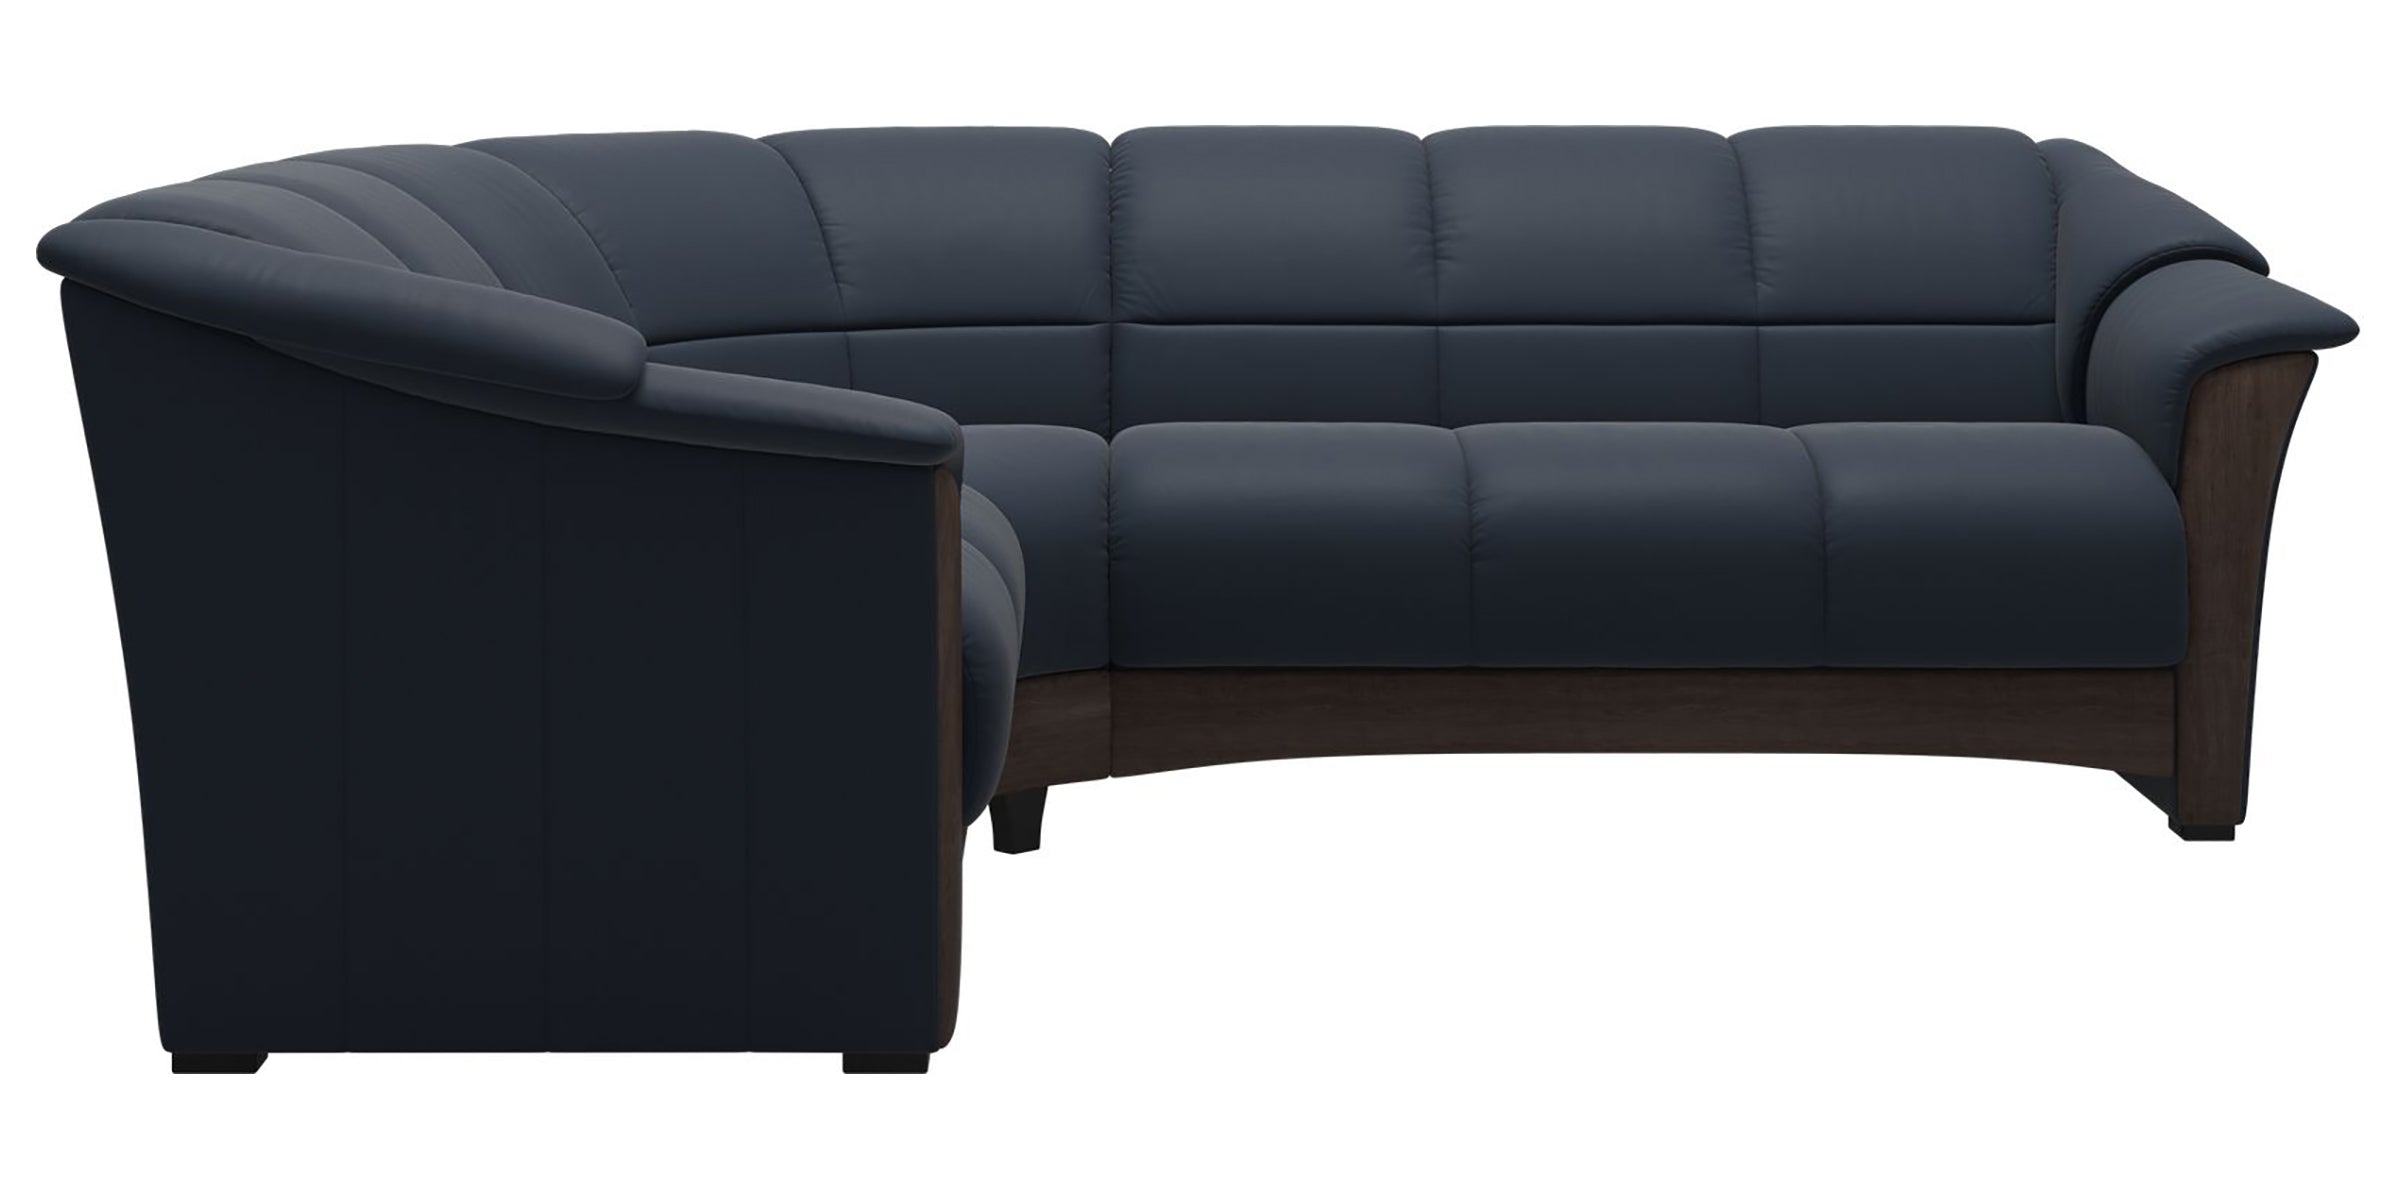 Paloma Leather Oxford Blue and Wenge Base | Stressless Oslo Sectional | Valley Ridge Furniture